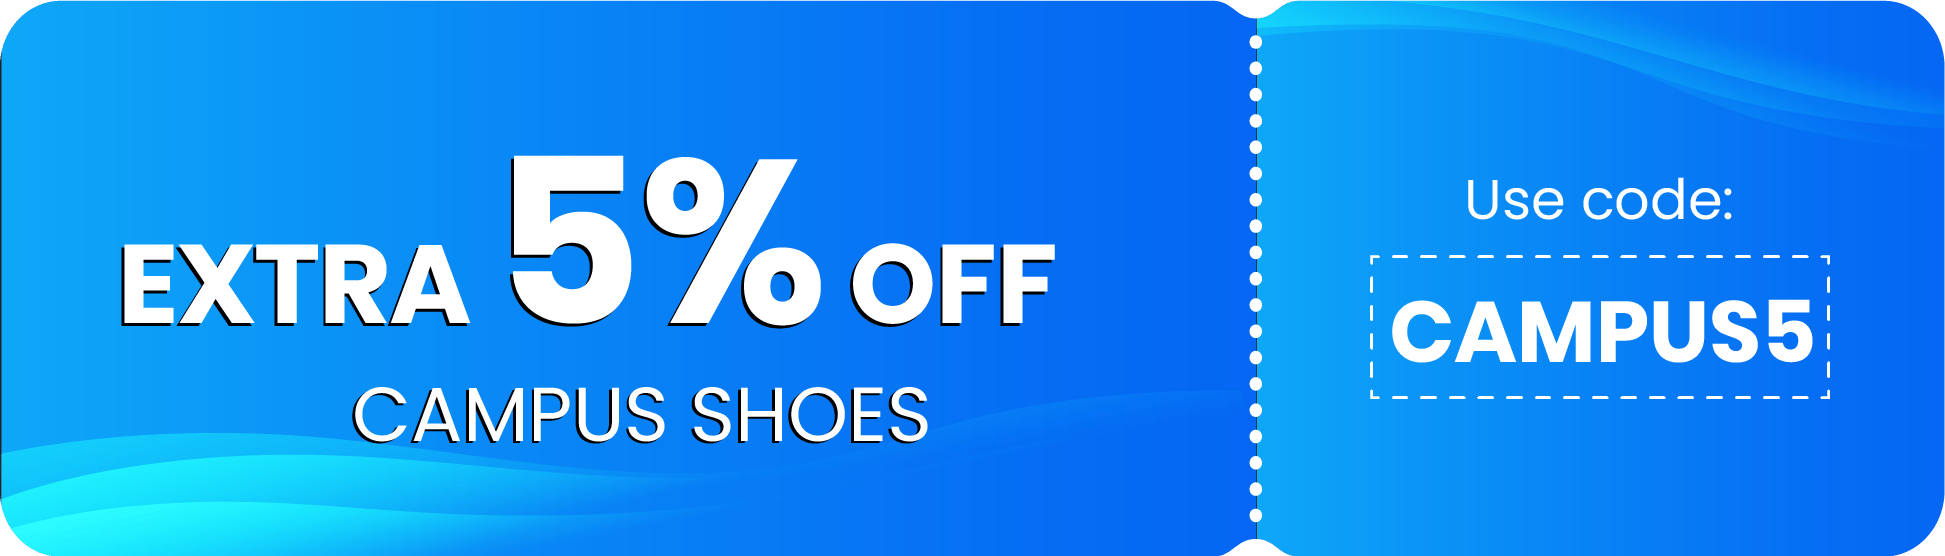 Campus Shoes upto 45% off + Extra 5% off Use code: CAMPUS5 Uniket